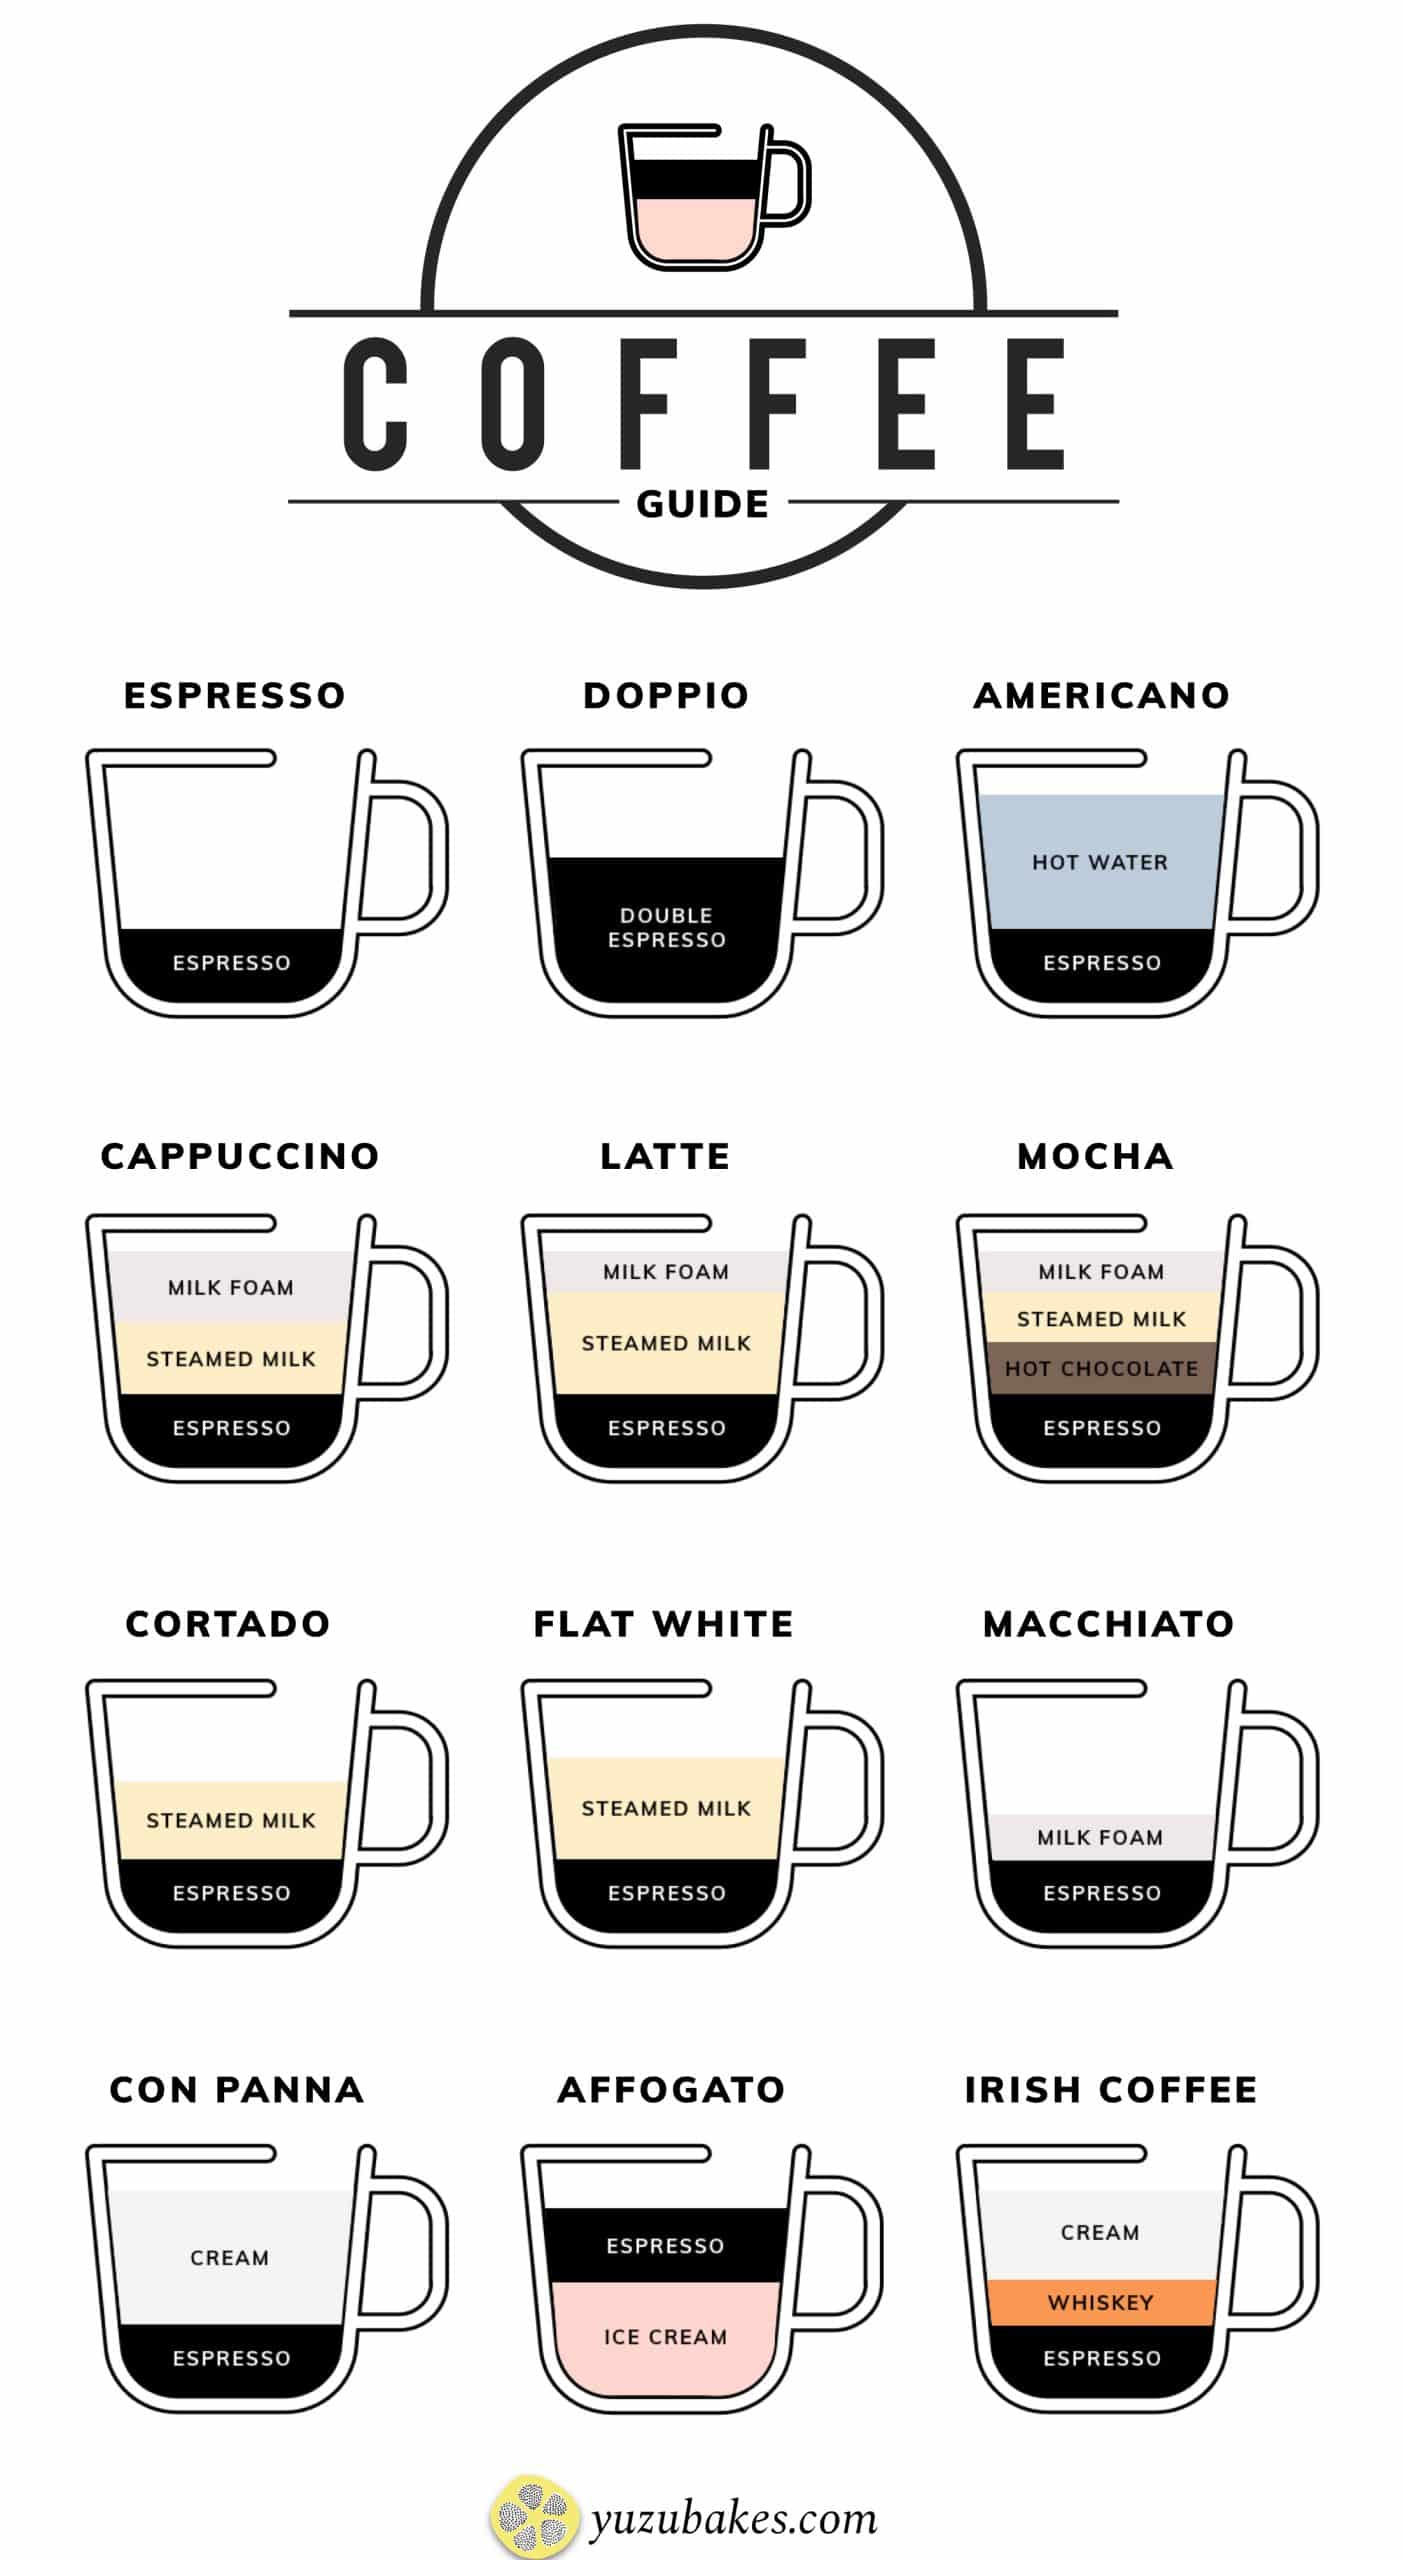 What Are The Different Types Of Coffee Drinks?